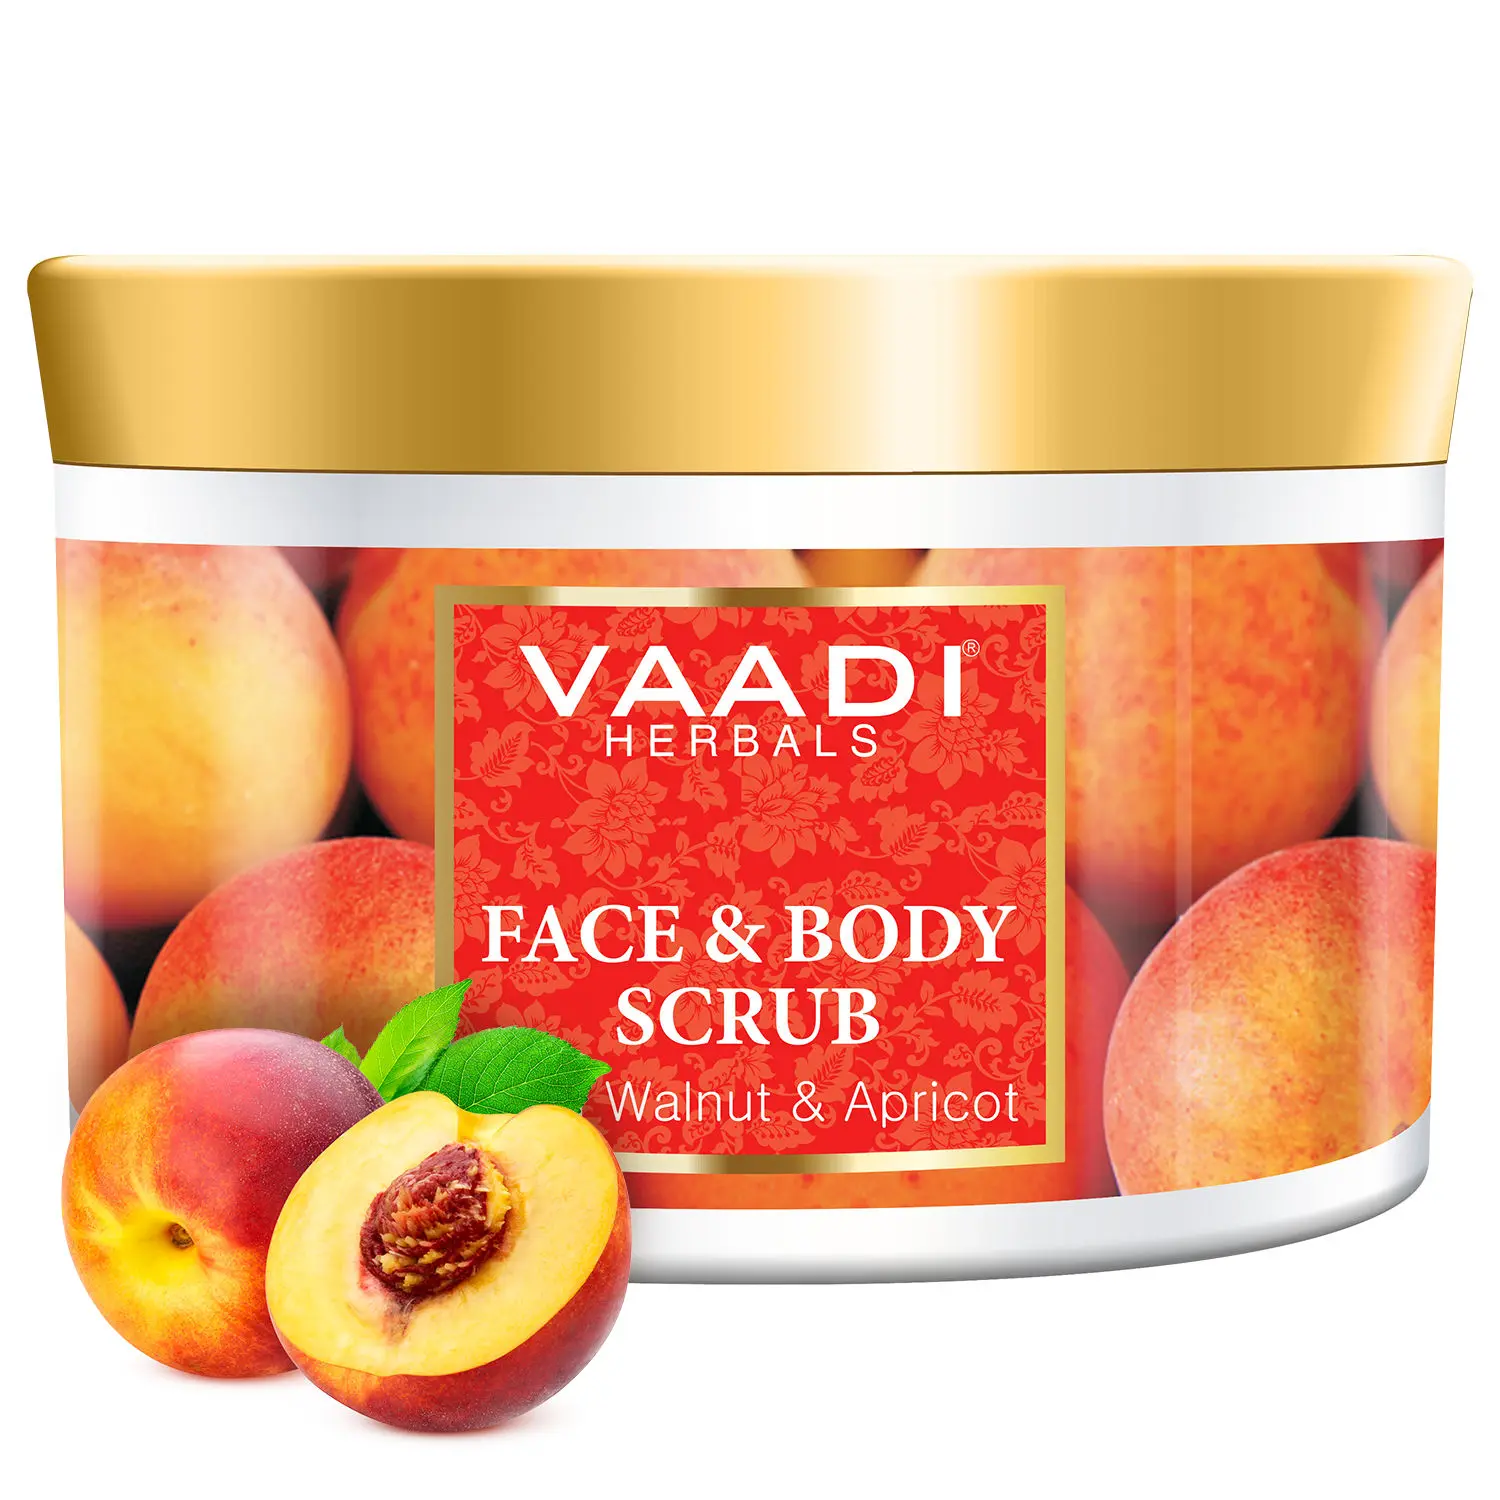 Vaadi Herbals Face And Body Scrub With Walnut And Apricot (500 g)